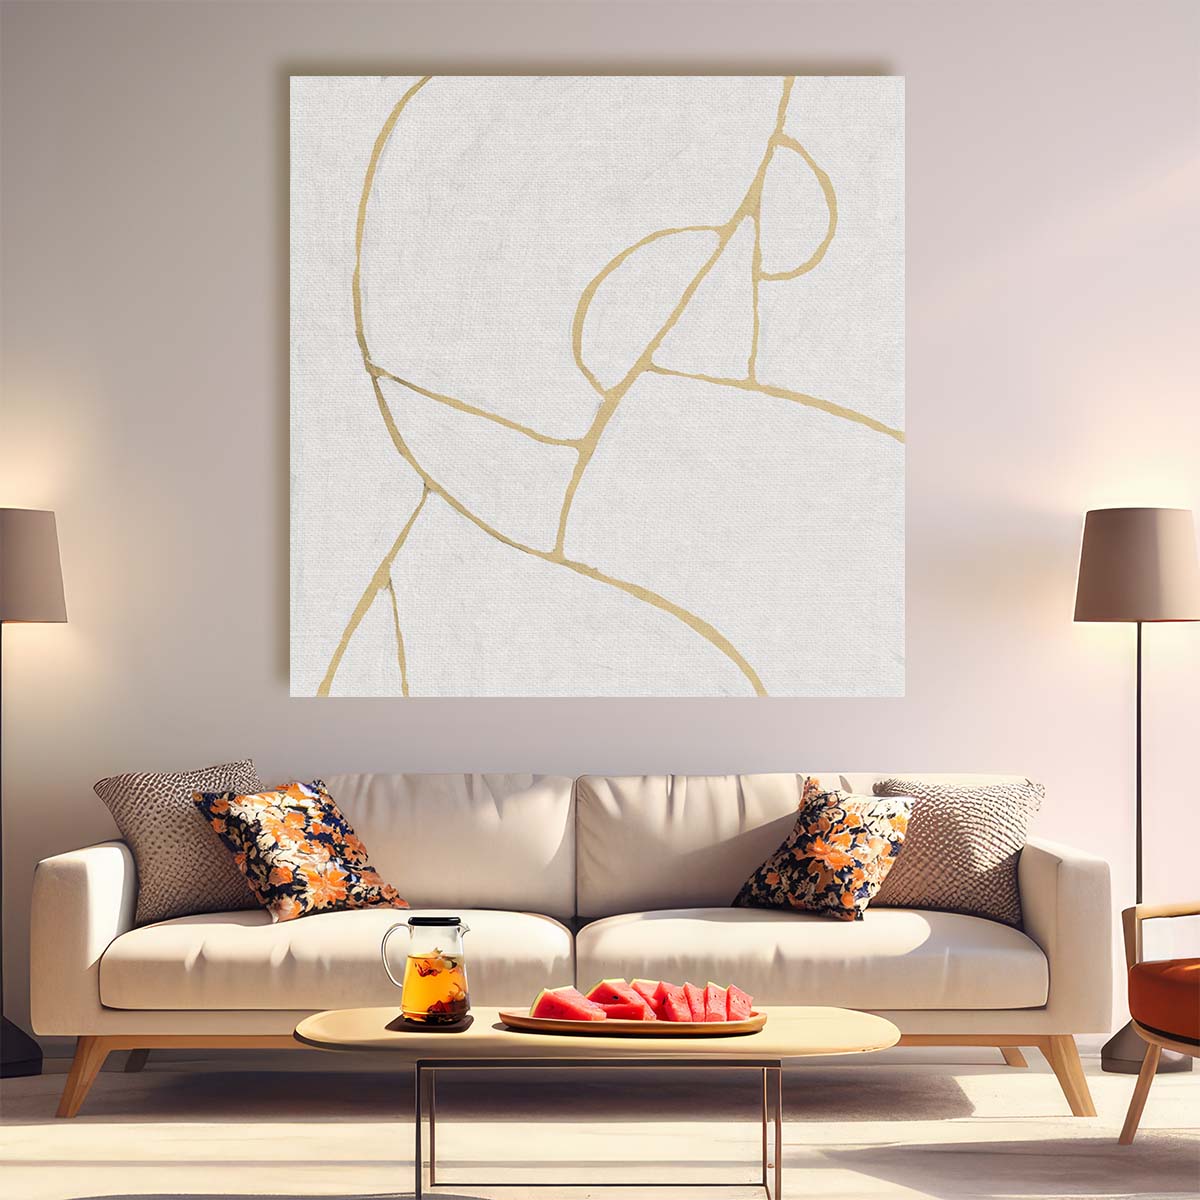 Geometric Lines Abstract Minimalist Painting by Dan Hobday Wall Art by Luxuriance Designs. Made in USA.